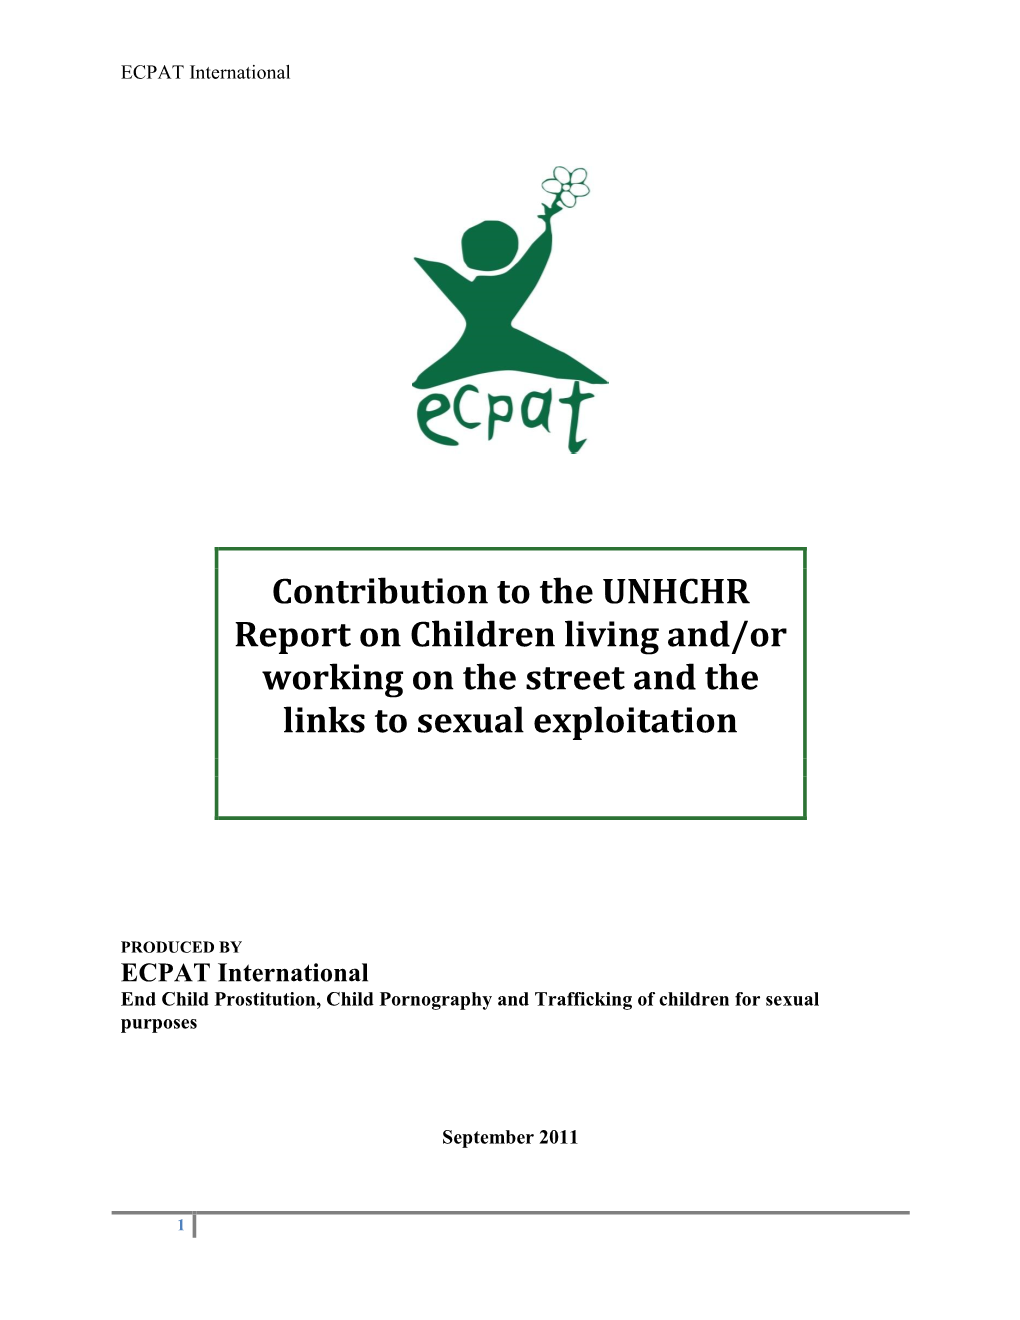 Contribution to the UNHCHR Report on Children Living And/Or Working